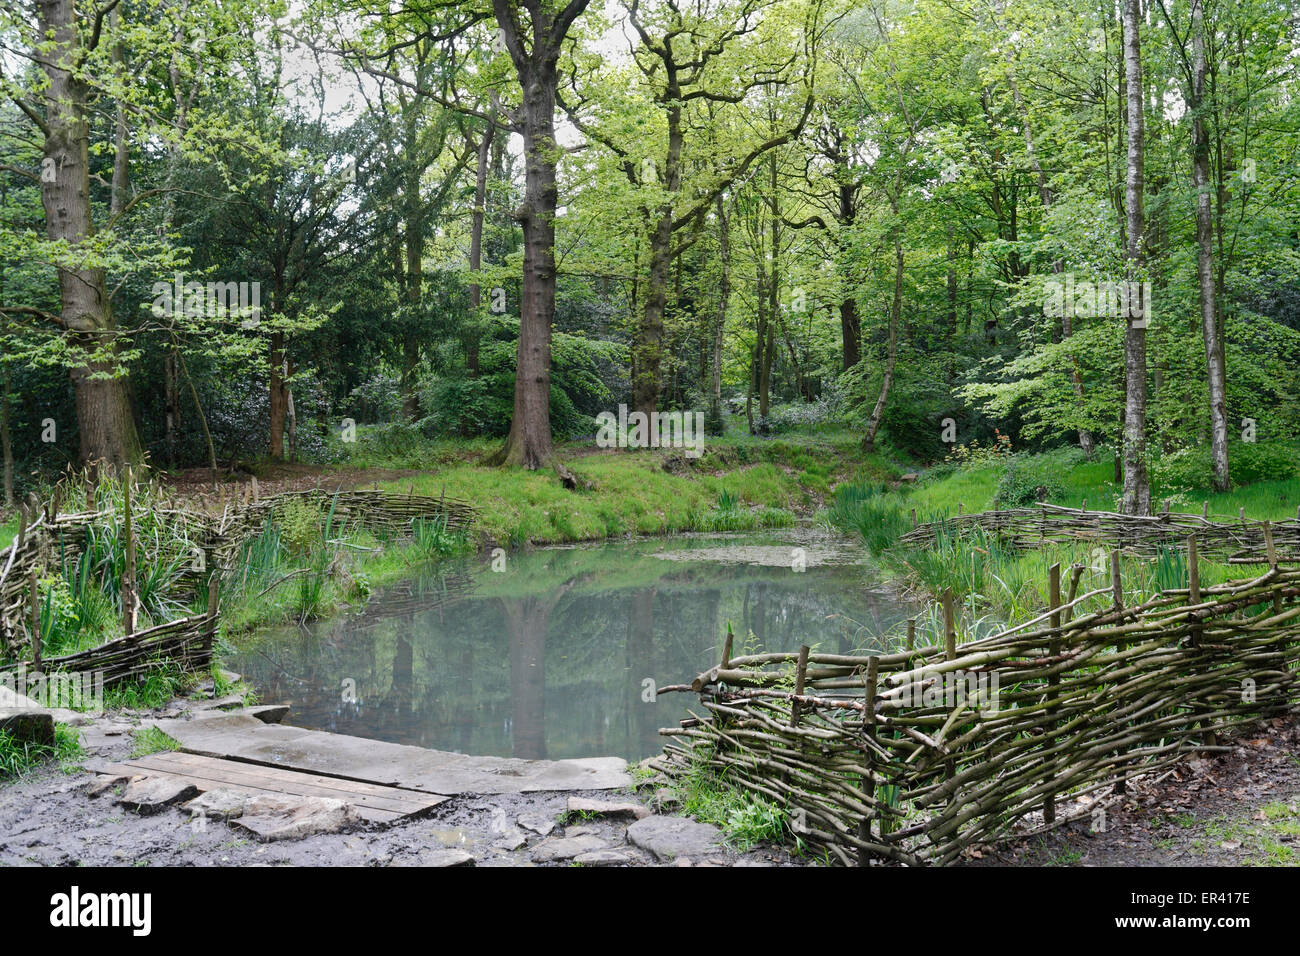 A man made wildlife pond in Ecclesall Woods in Sheffield England, suburban ancient woodland Local nature reserve habitat, biodiversity Stock Photo